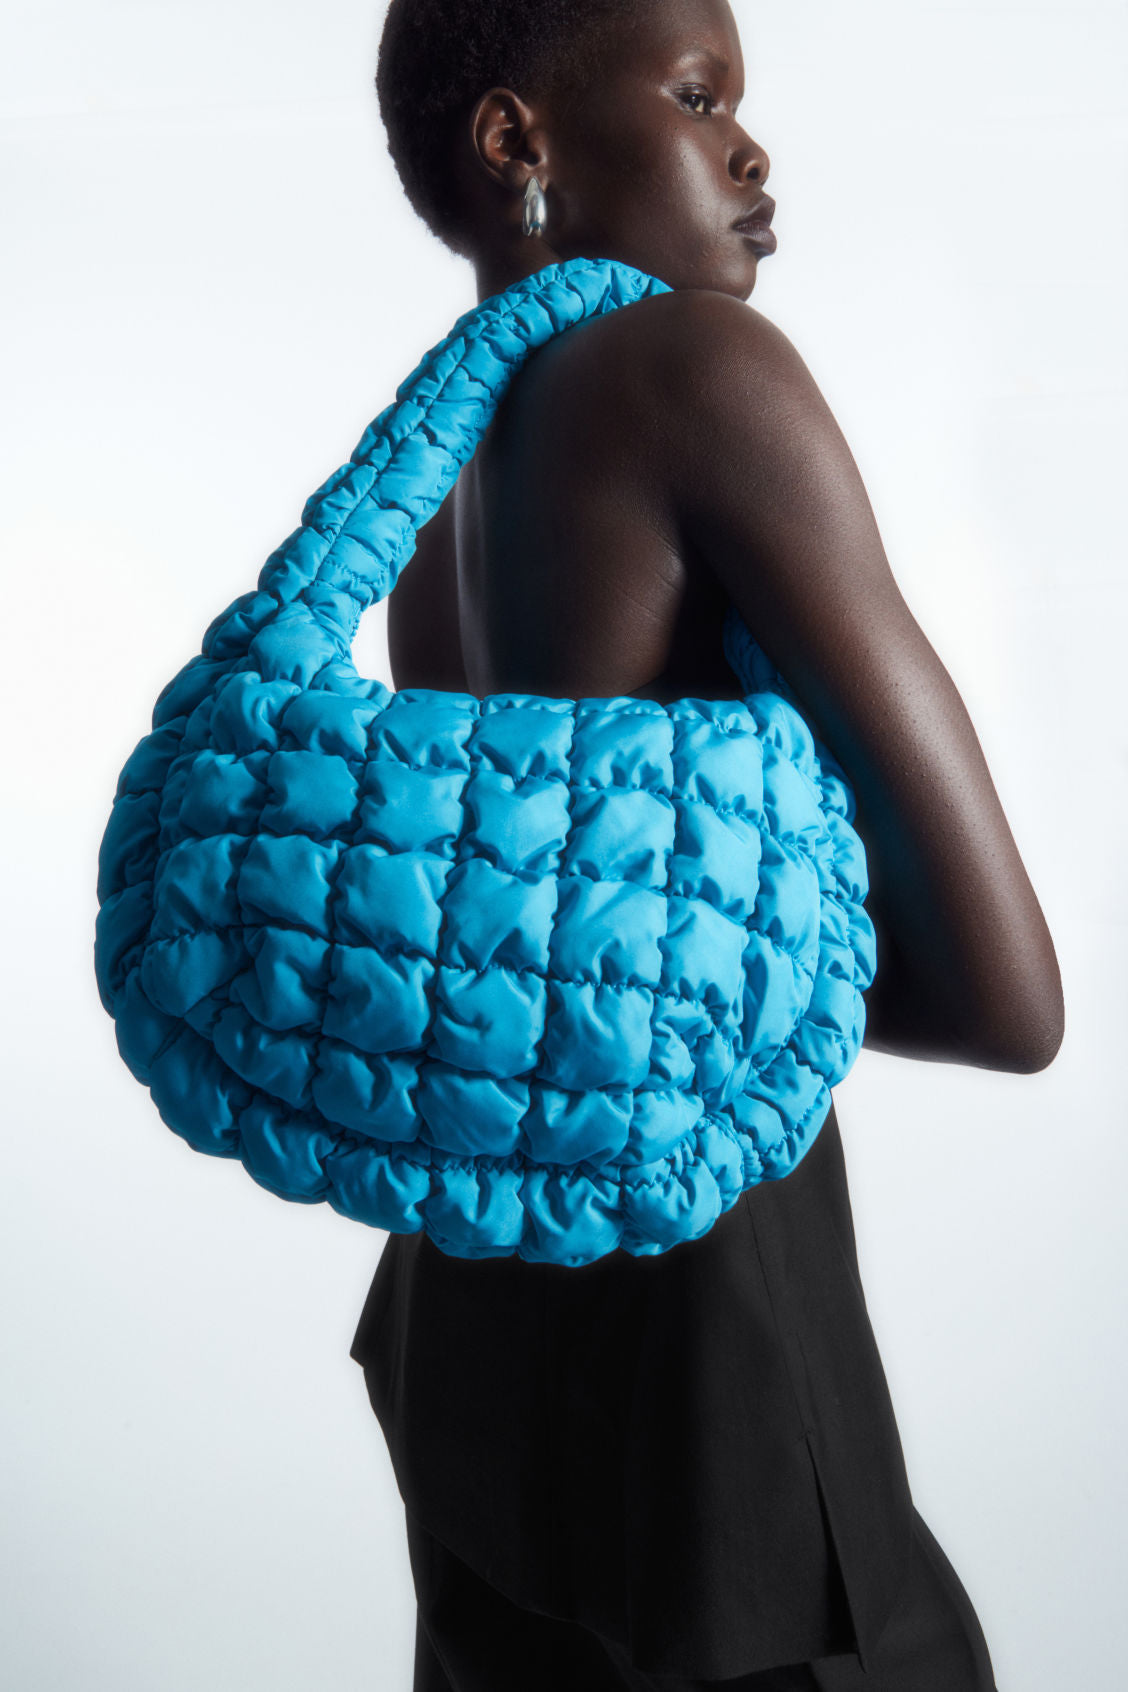 Quilted mini bag